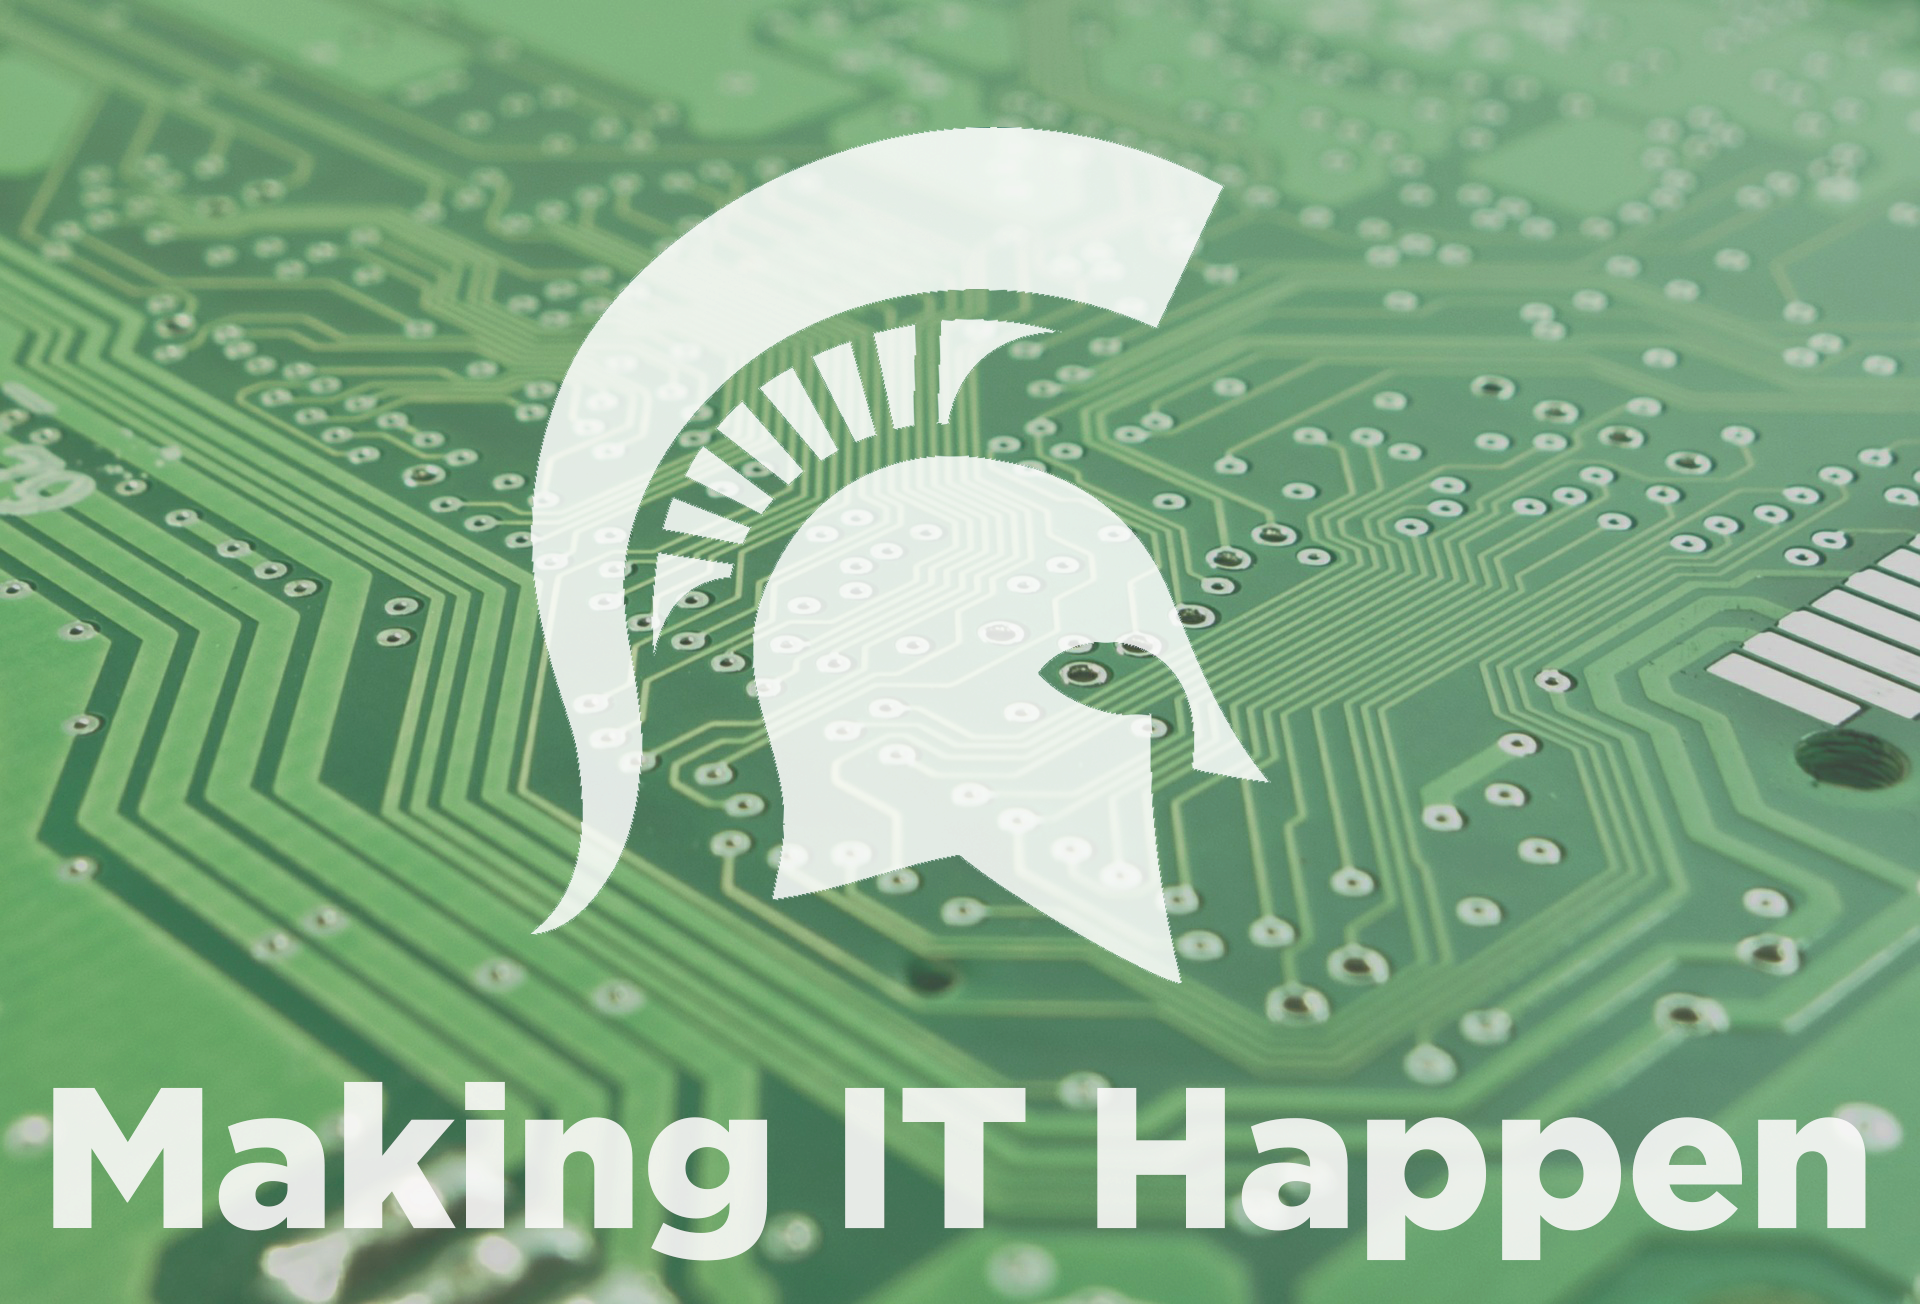 The Spartan helmet over a circuit-board background and the text "Making IT Happen."